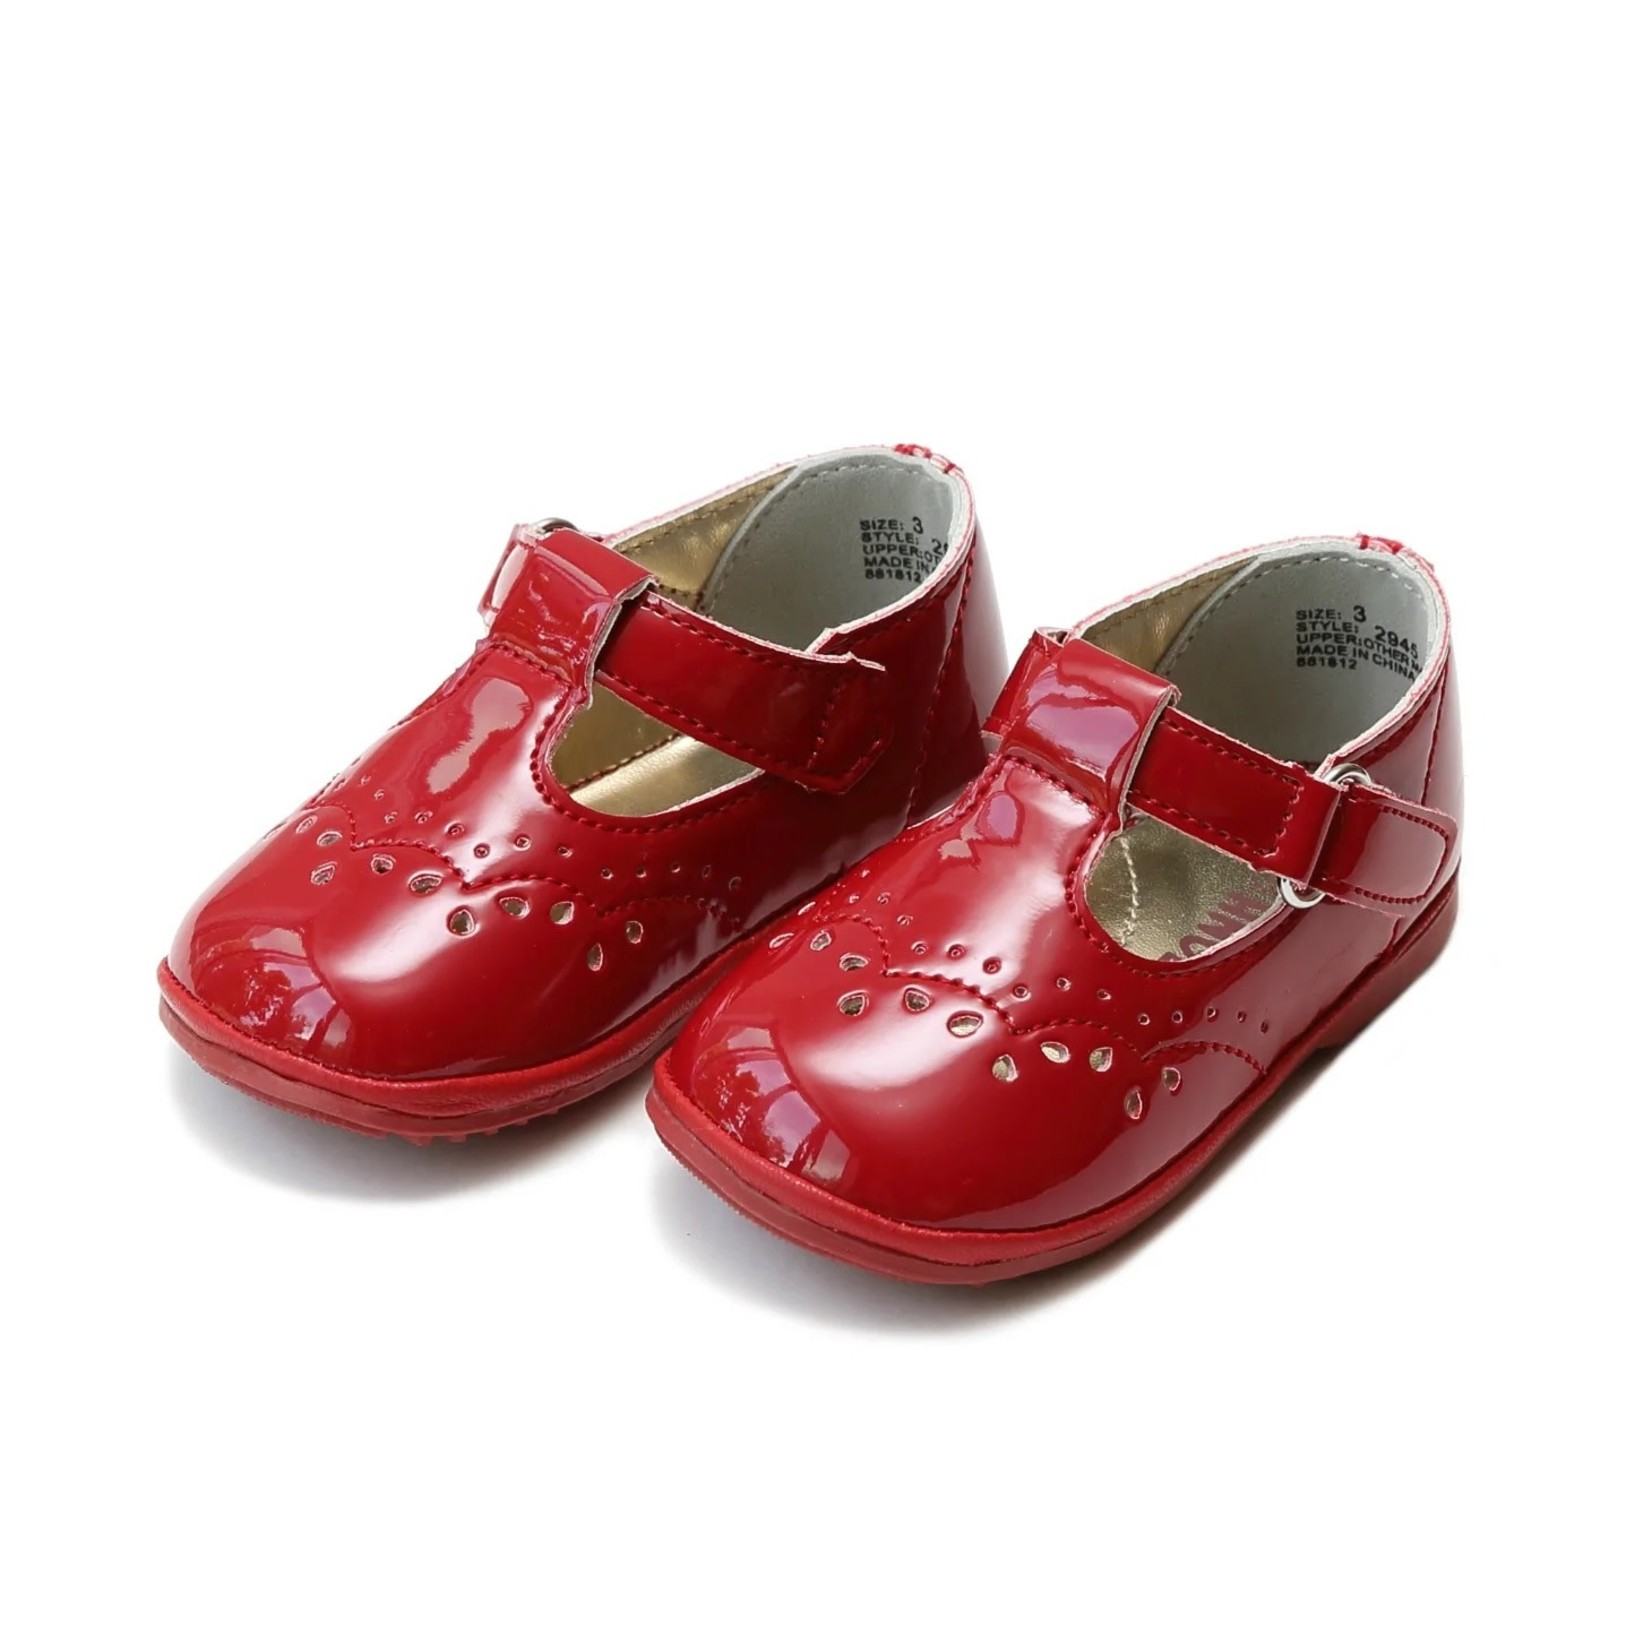 Angel Baby Shoes Navy Patent T-Strap